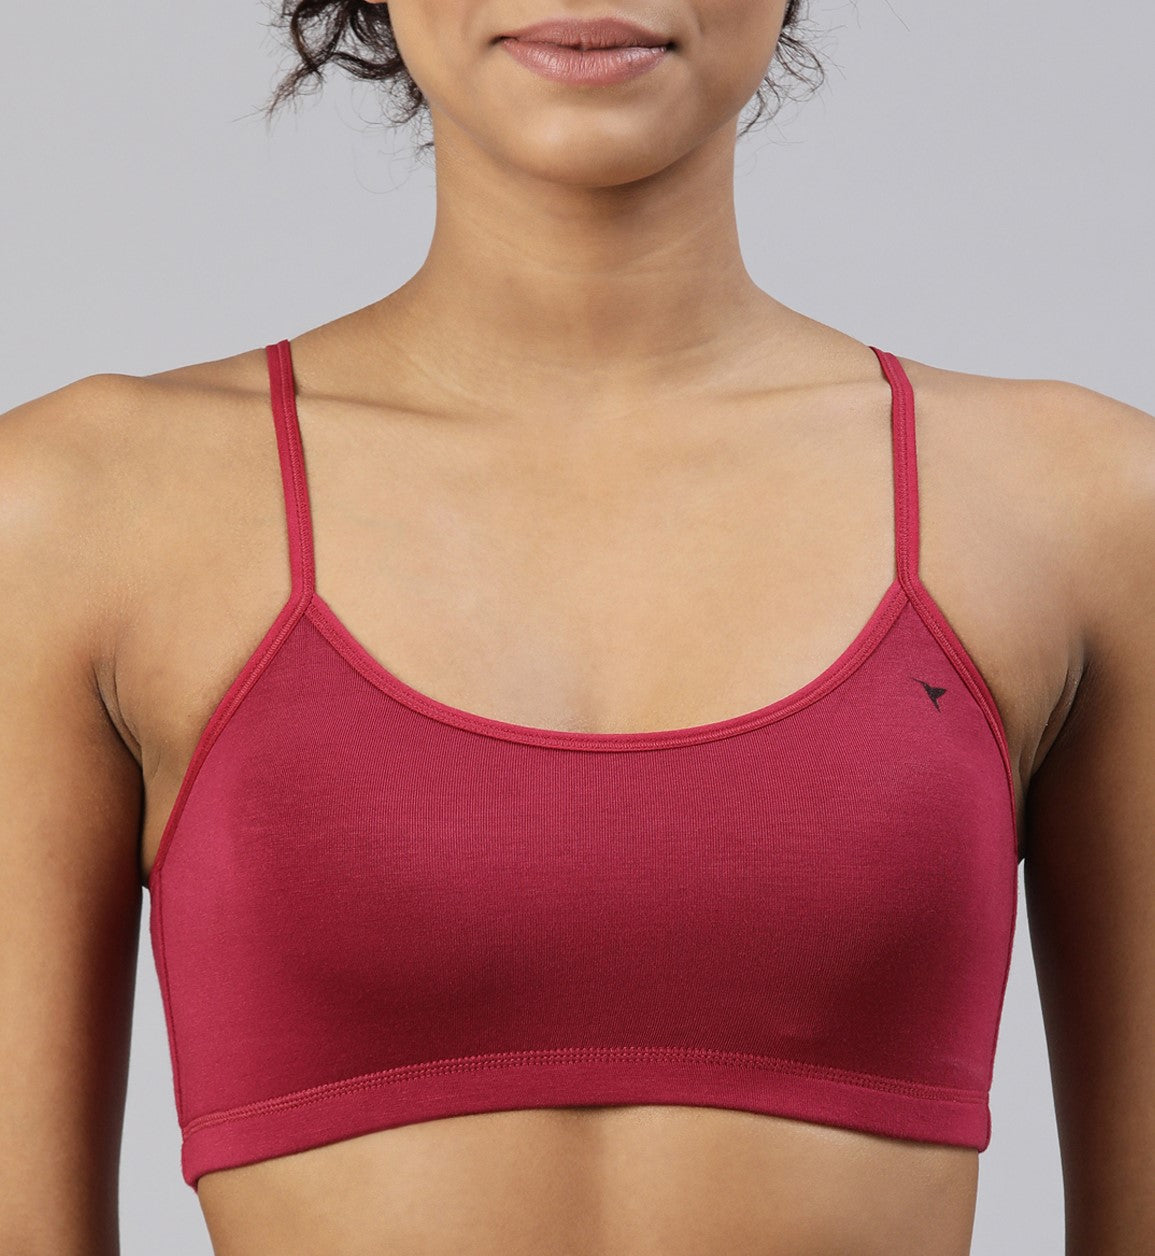 blossom-starters bra-red wine2-teen collection